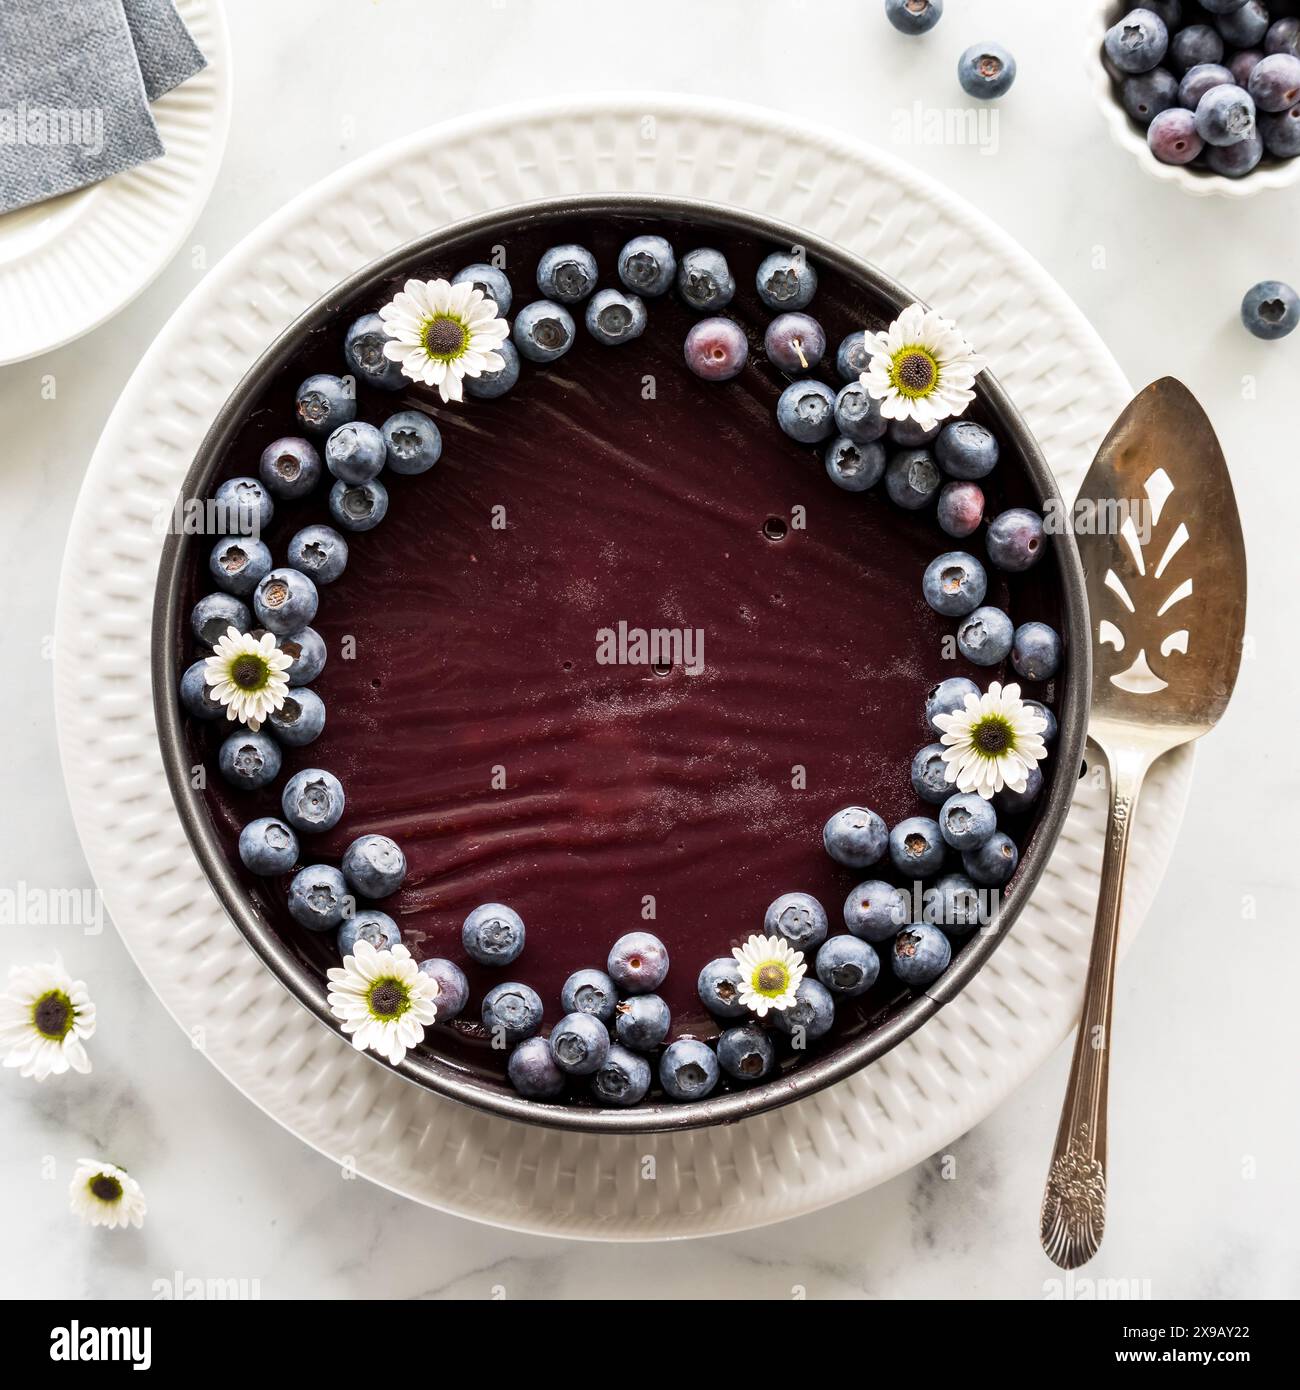 Top down view of a homemade blueberry cheesecake topped with fresh blueberries. Stock Photo